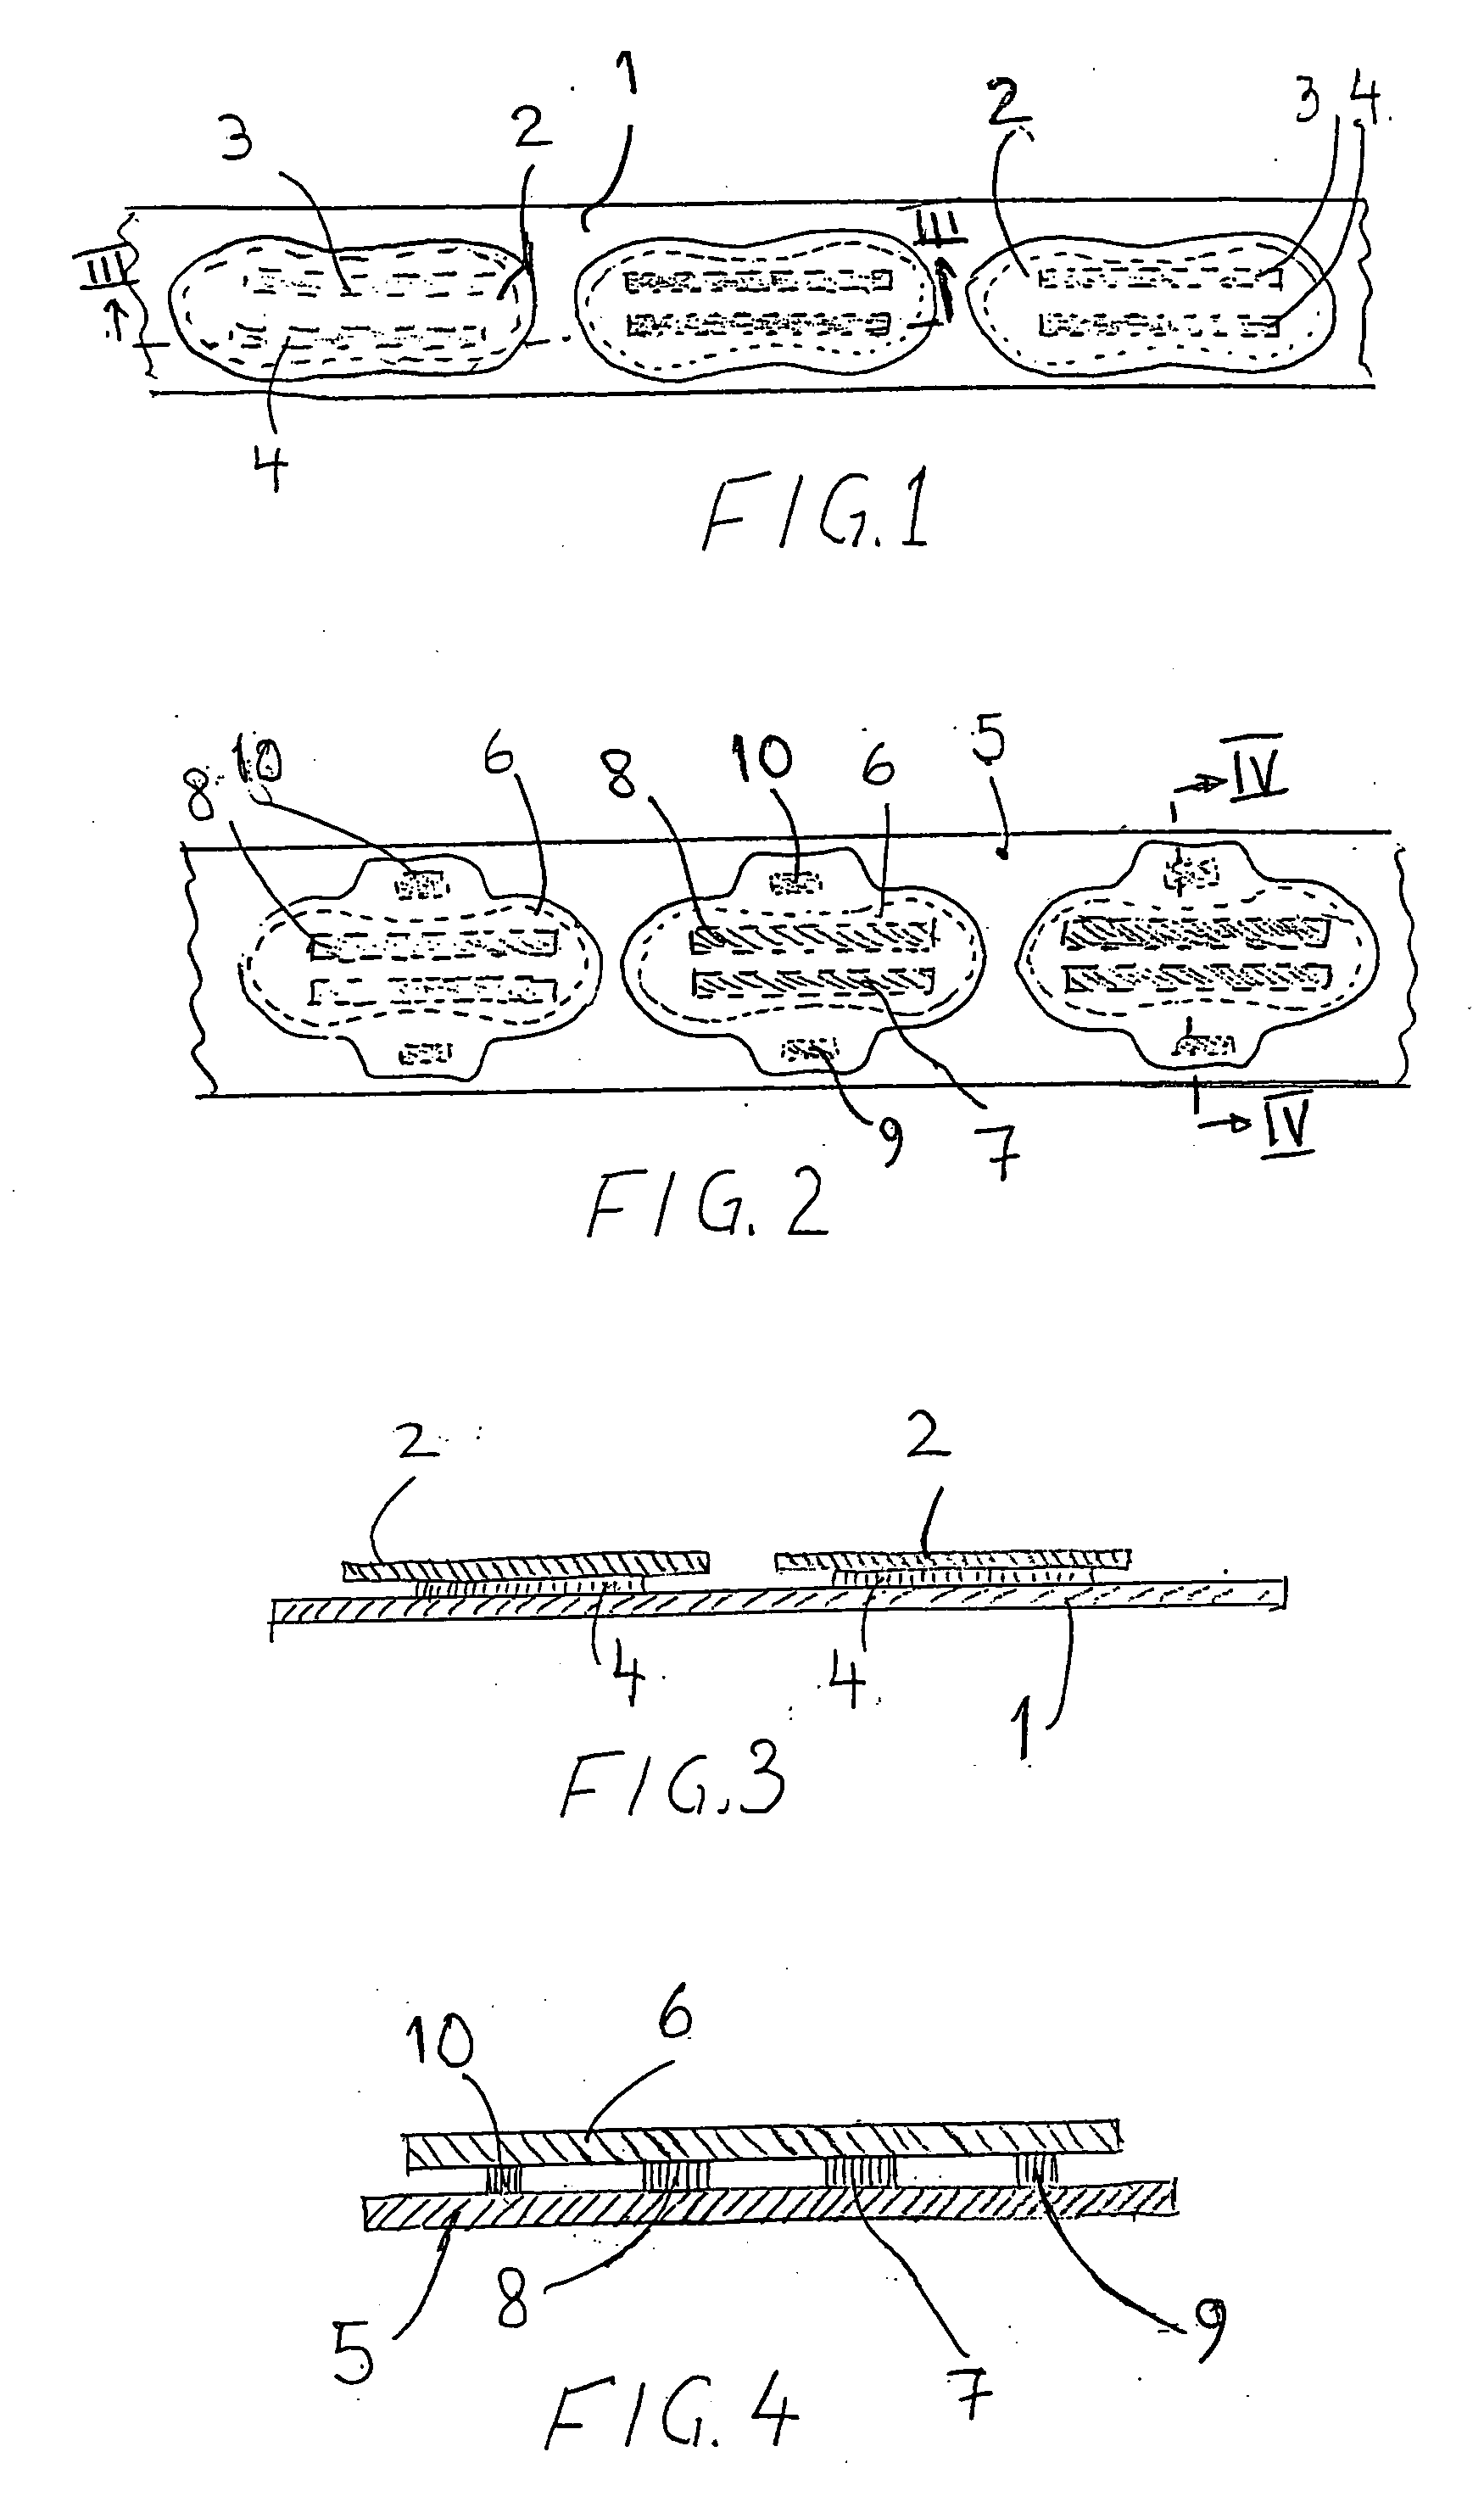 Dispenser and roll for absorbent articles